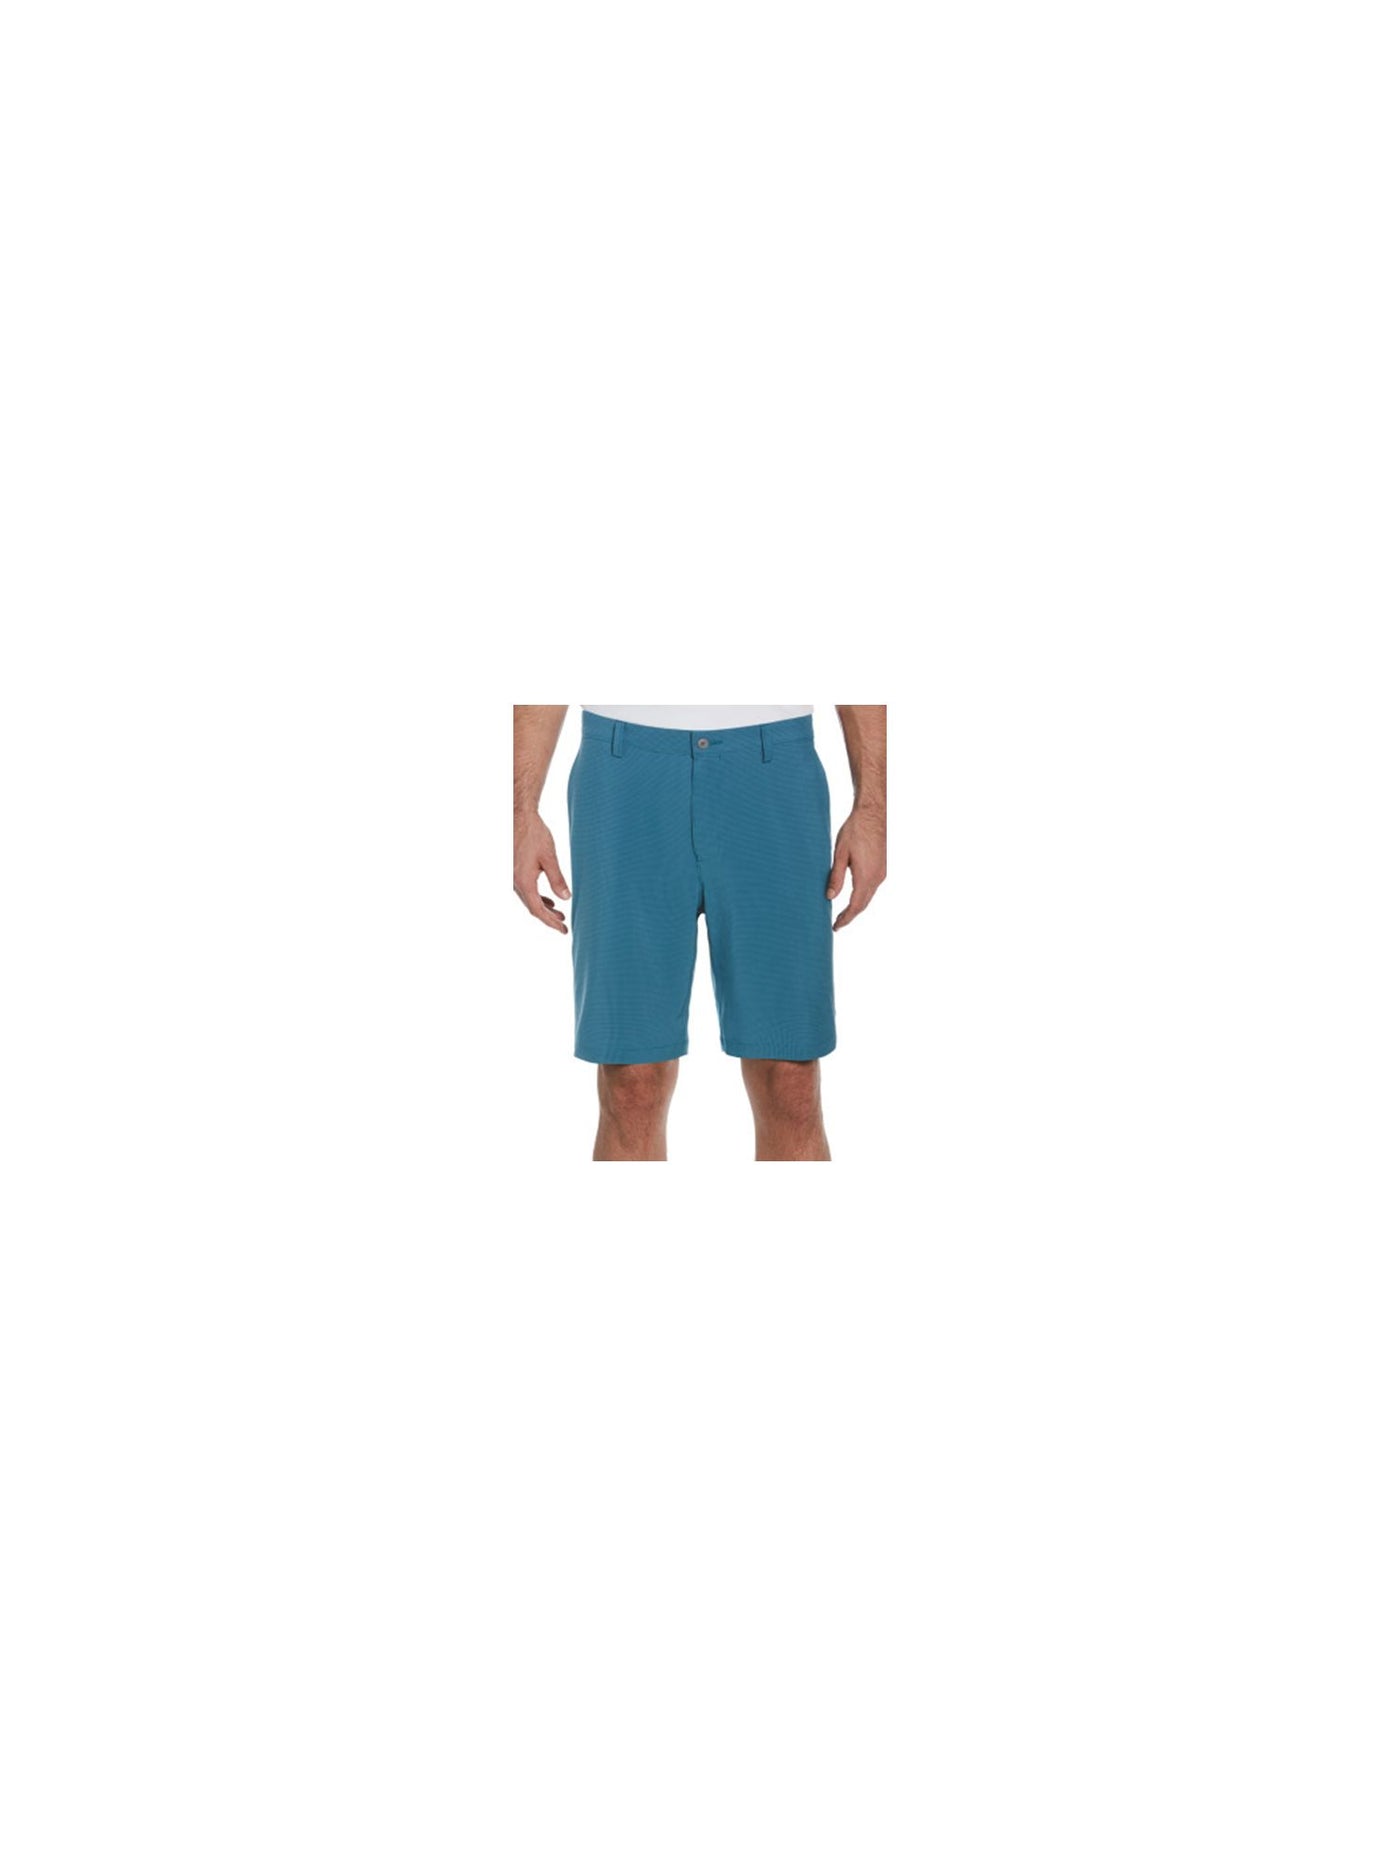 HYBRID APPAREL Mens Teal Flat Front, Houndstooth Stretch Shorts 32 Waist